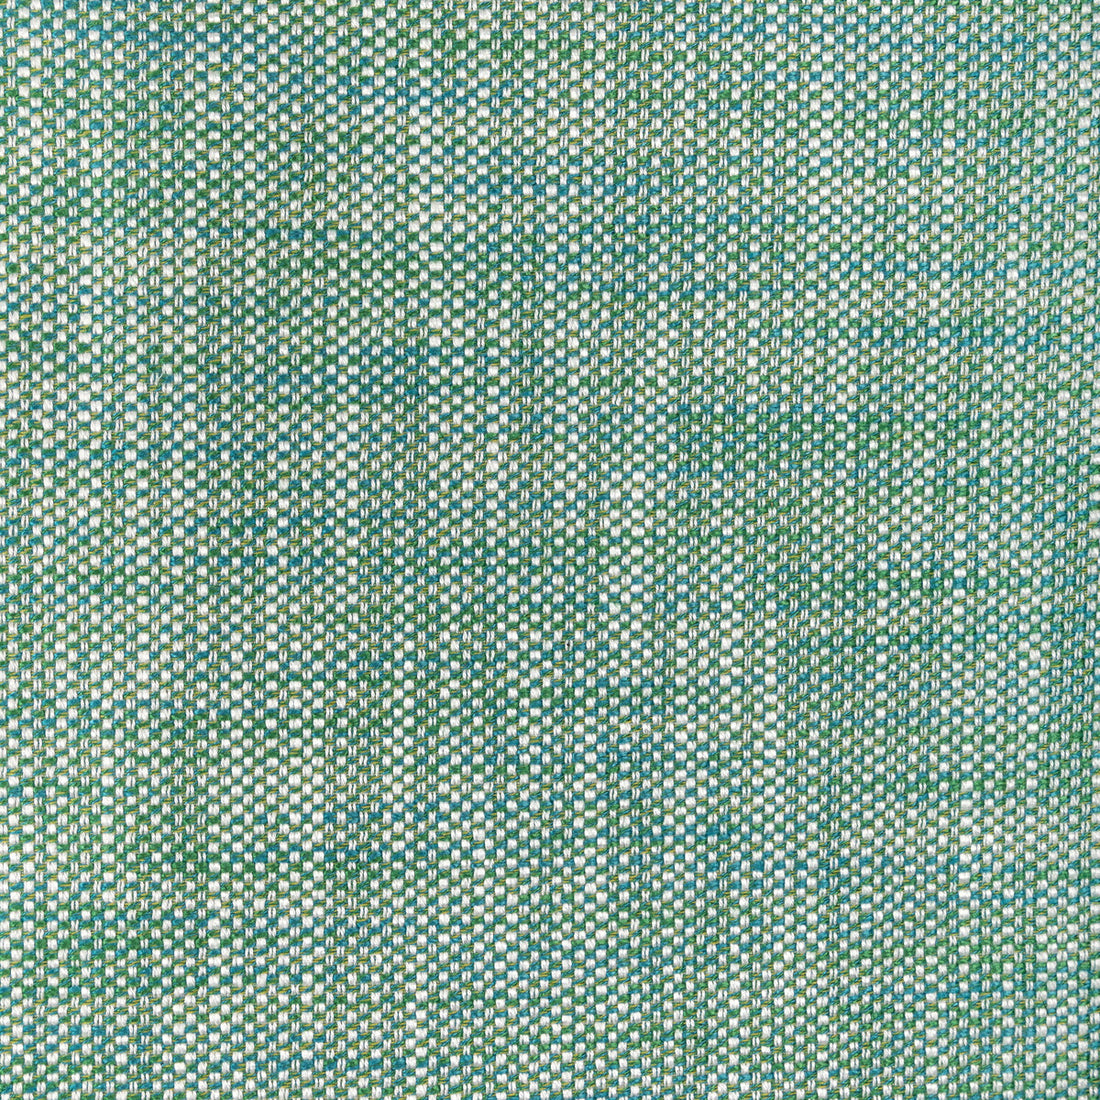 Kravet Design fabric in 36414-315 color - pattern 36414.315.0 - by Kravet Design in the Performance Crypton Home collection